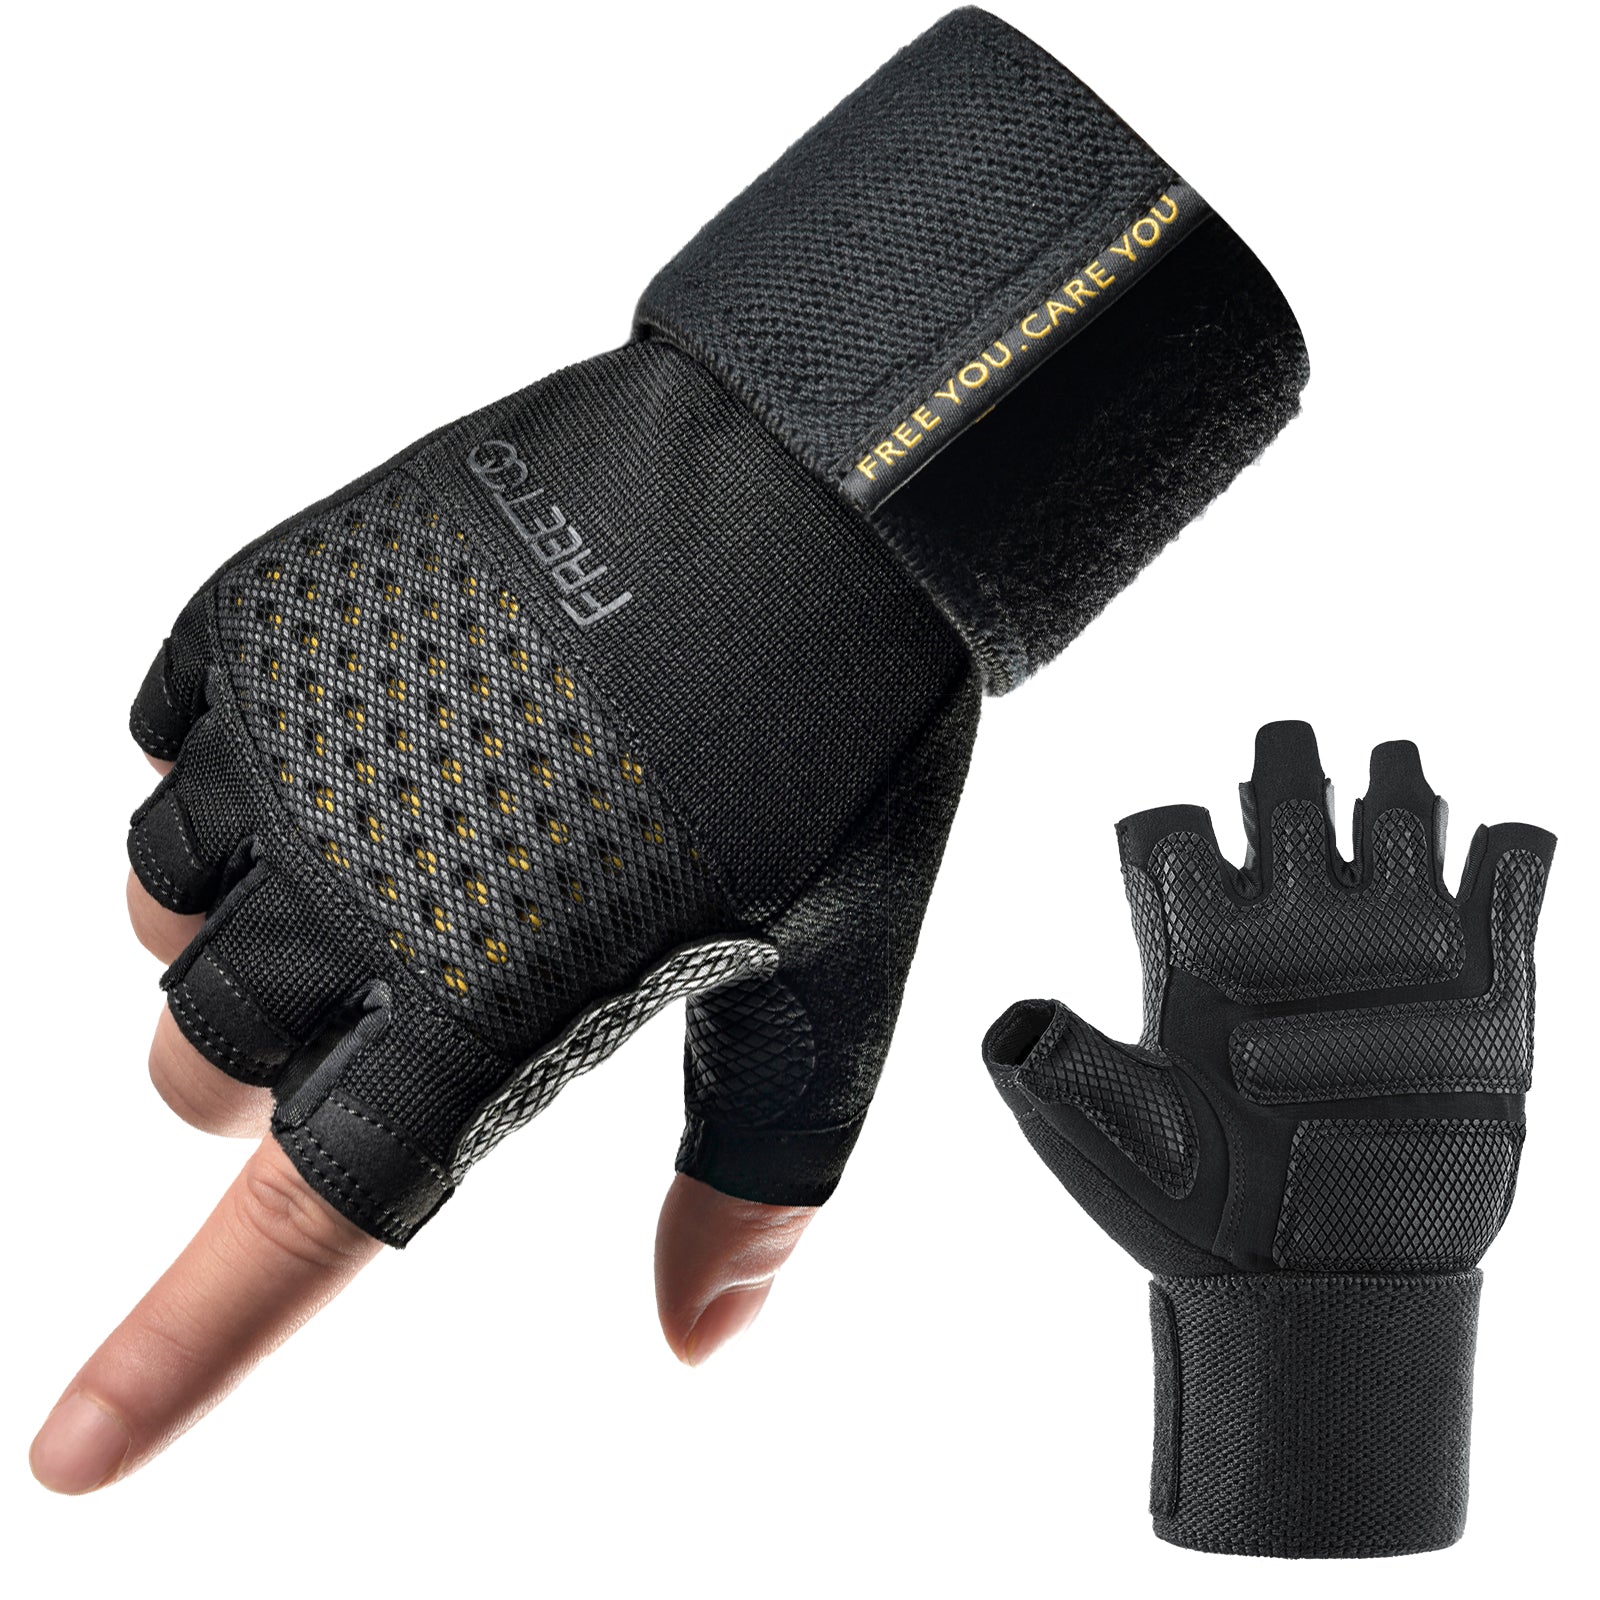 FREETOO® DeadLifts Workout gloves with Integrated Wrist Wraps Padded Grip